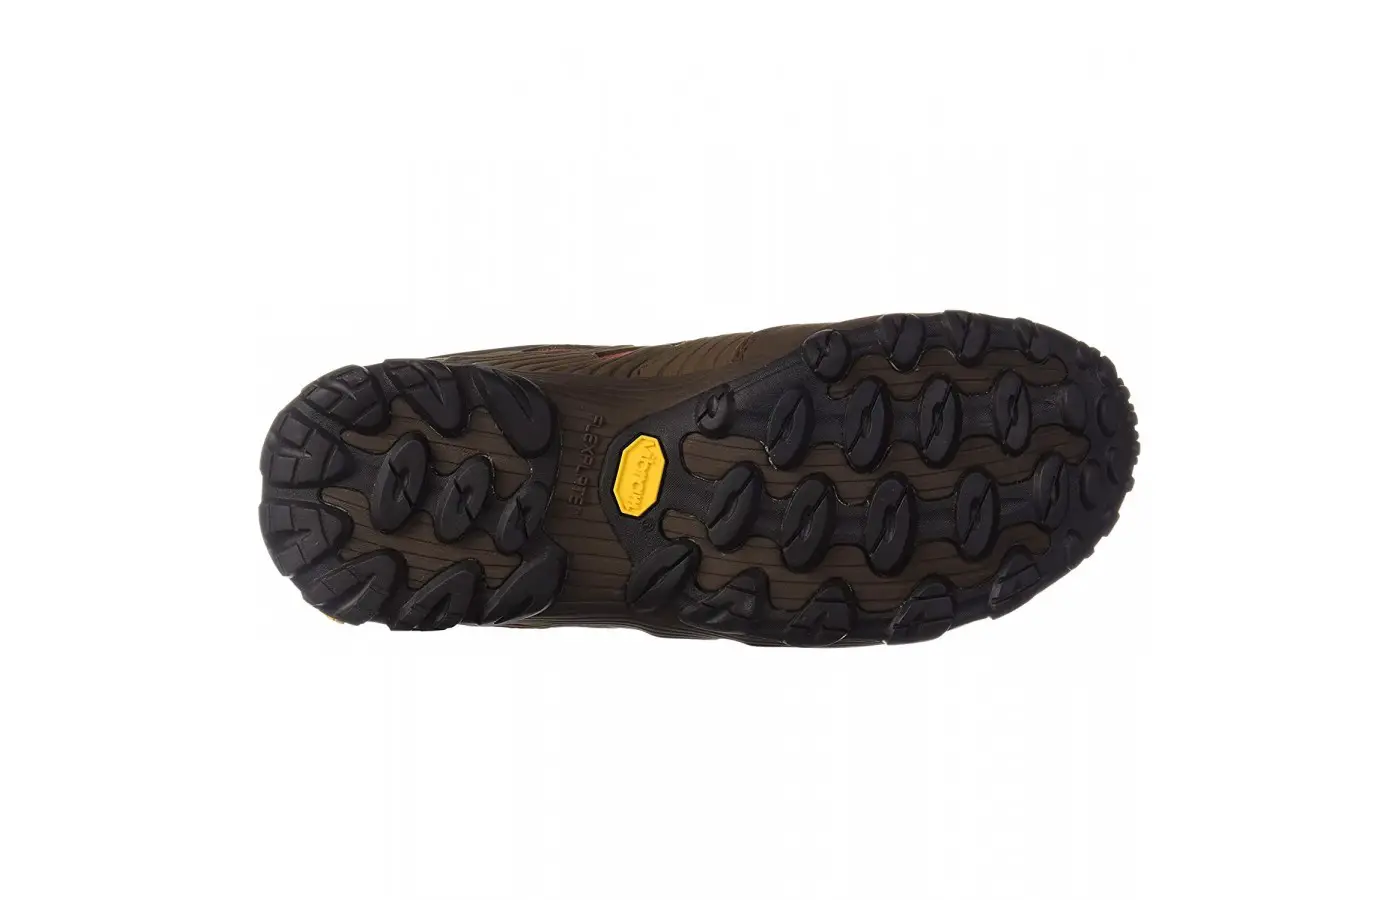 The Merrell Chameleon offers a Vibram TC5 outsole for grip and durability.